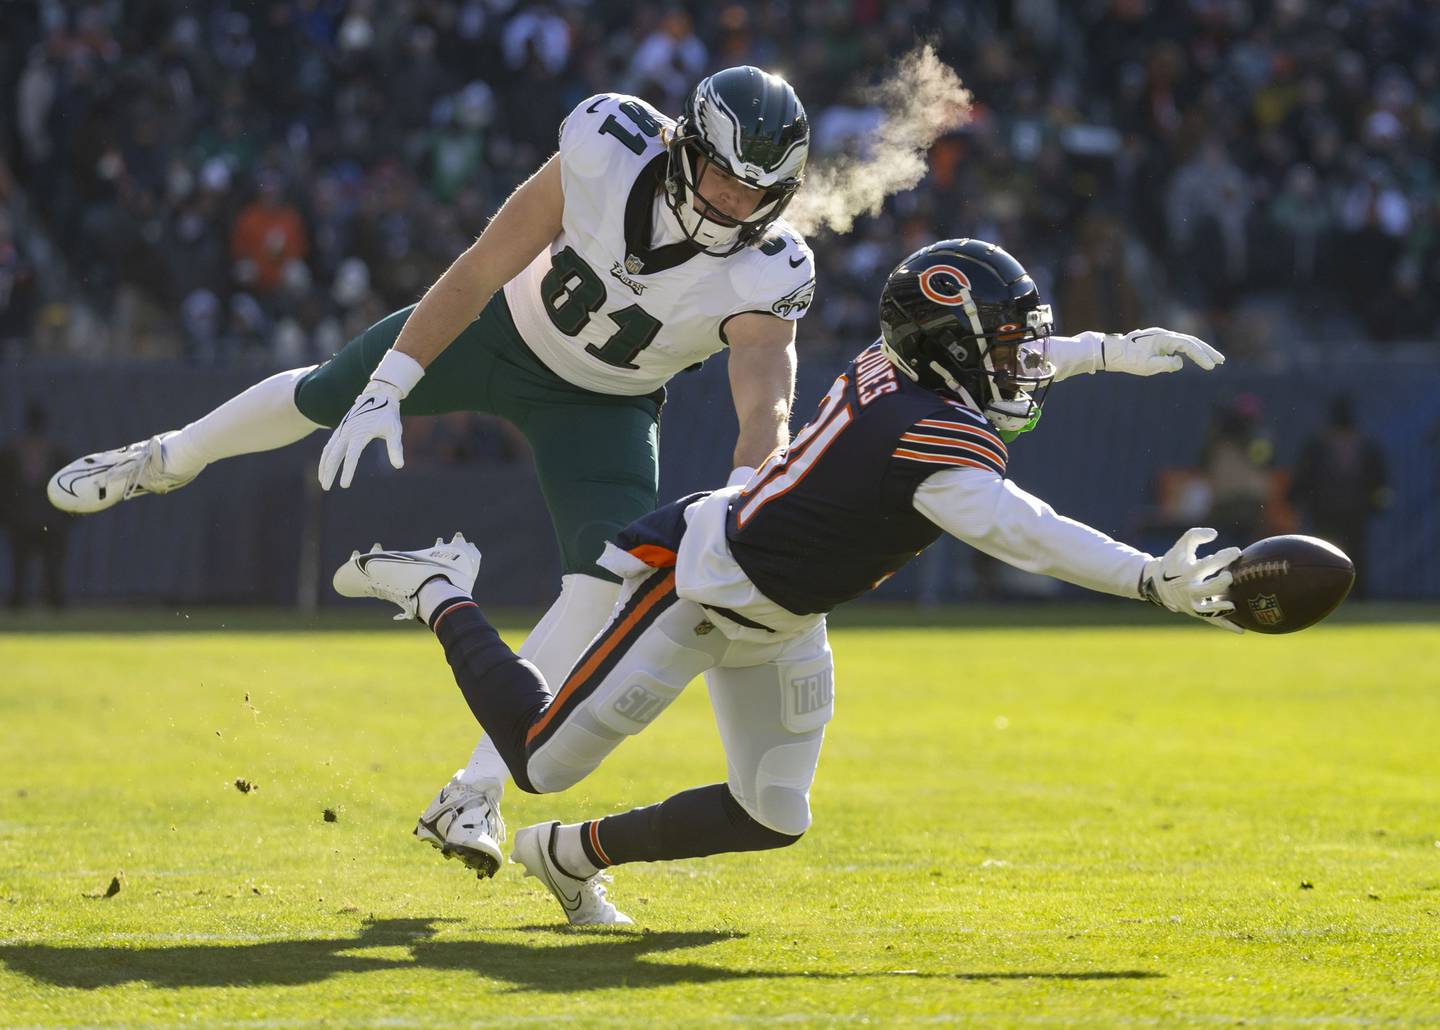 Bears cornerback Jaylon Jones breaks up a pass intended for Eagles tight end Grant Calcaterra in the second quarter on Dec. 18, 2022.